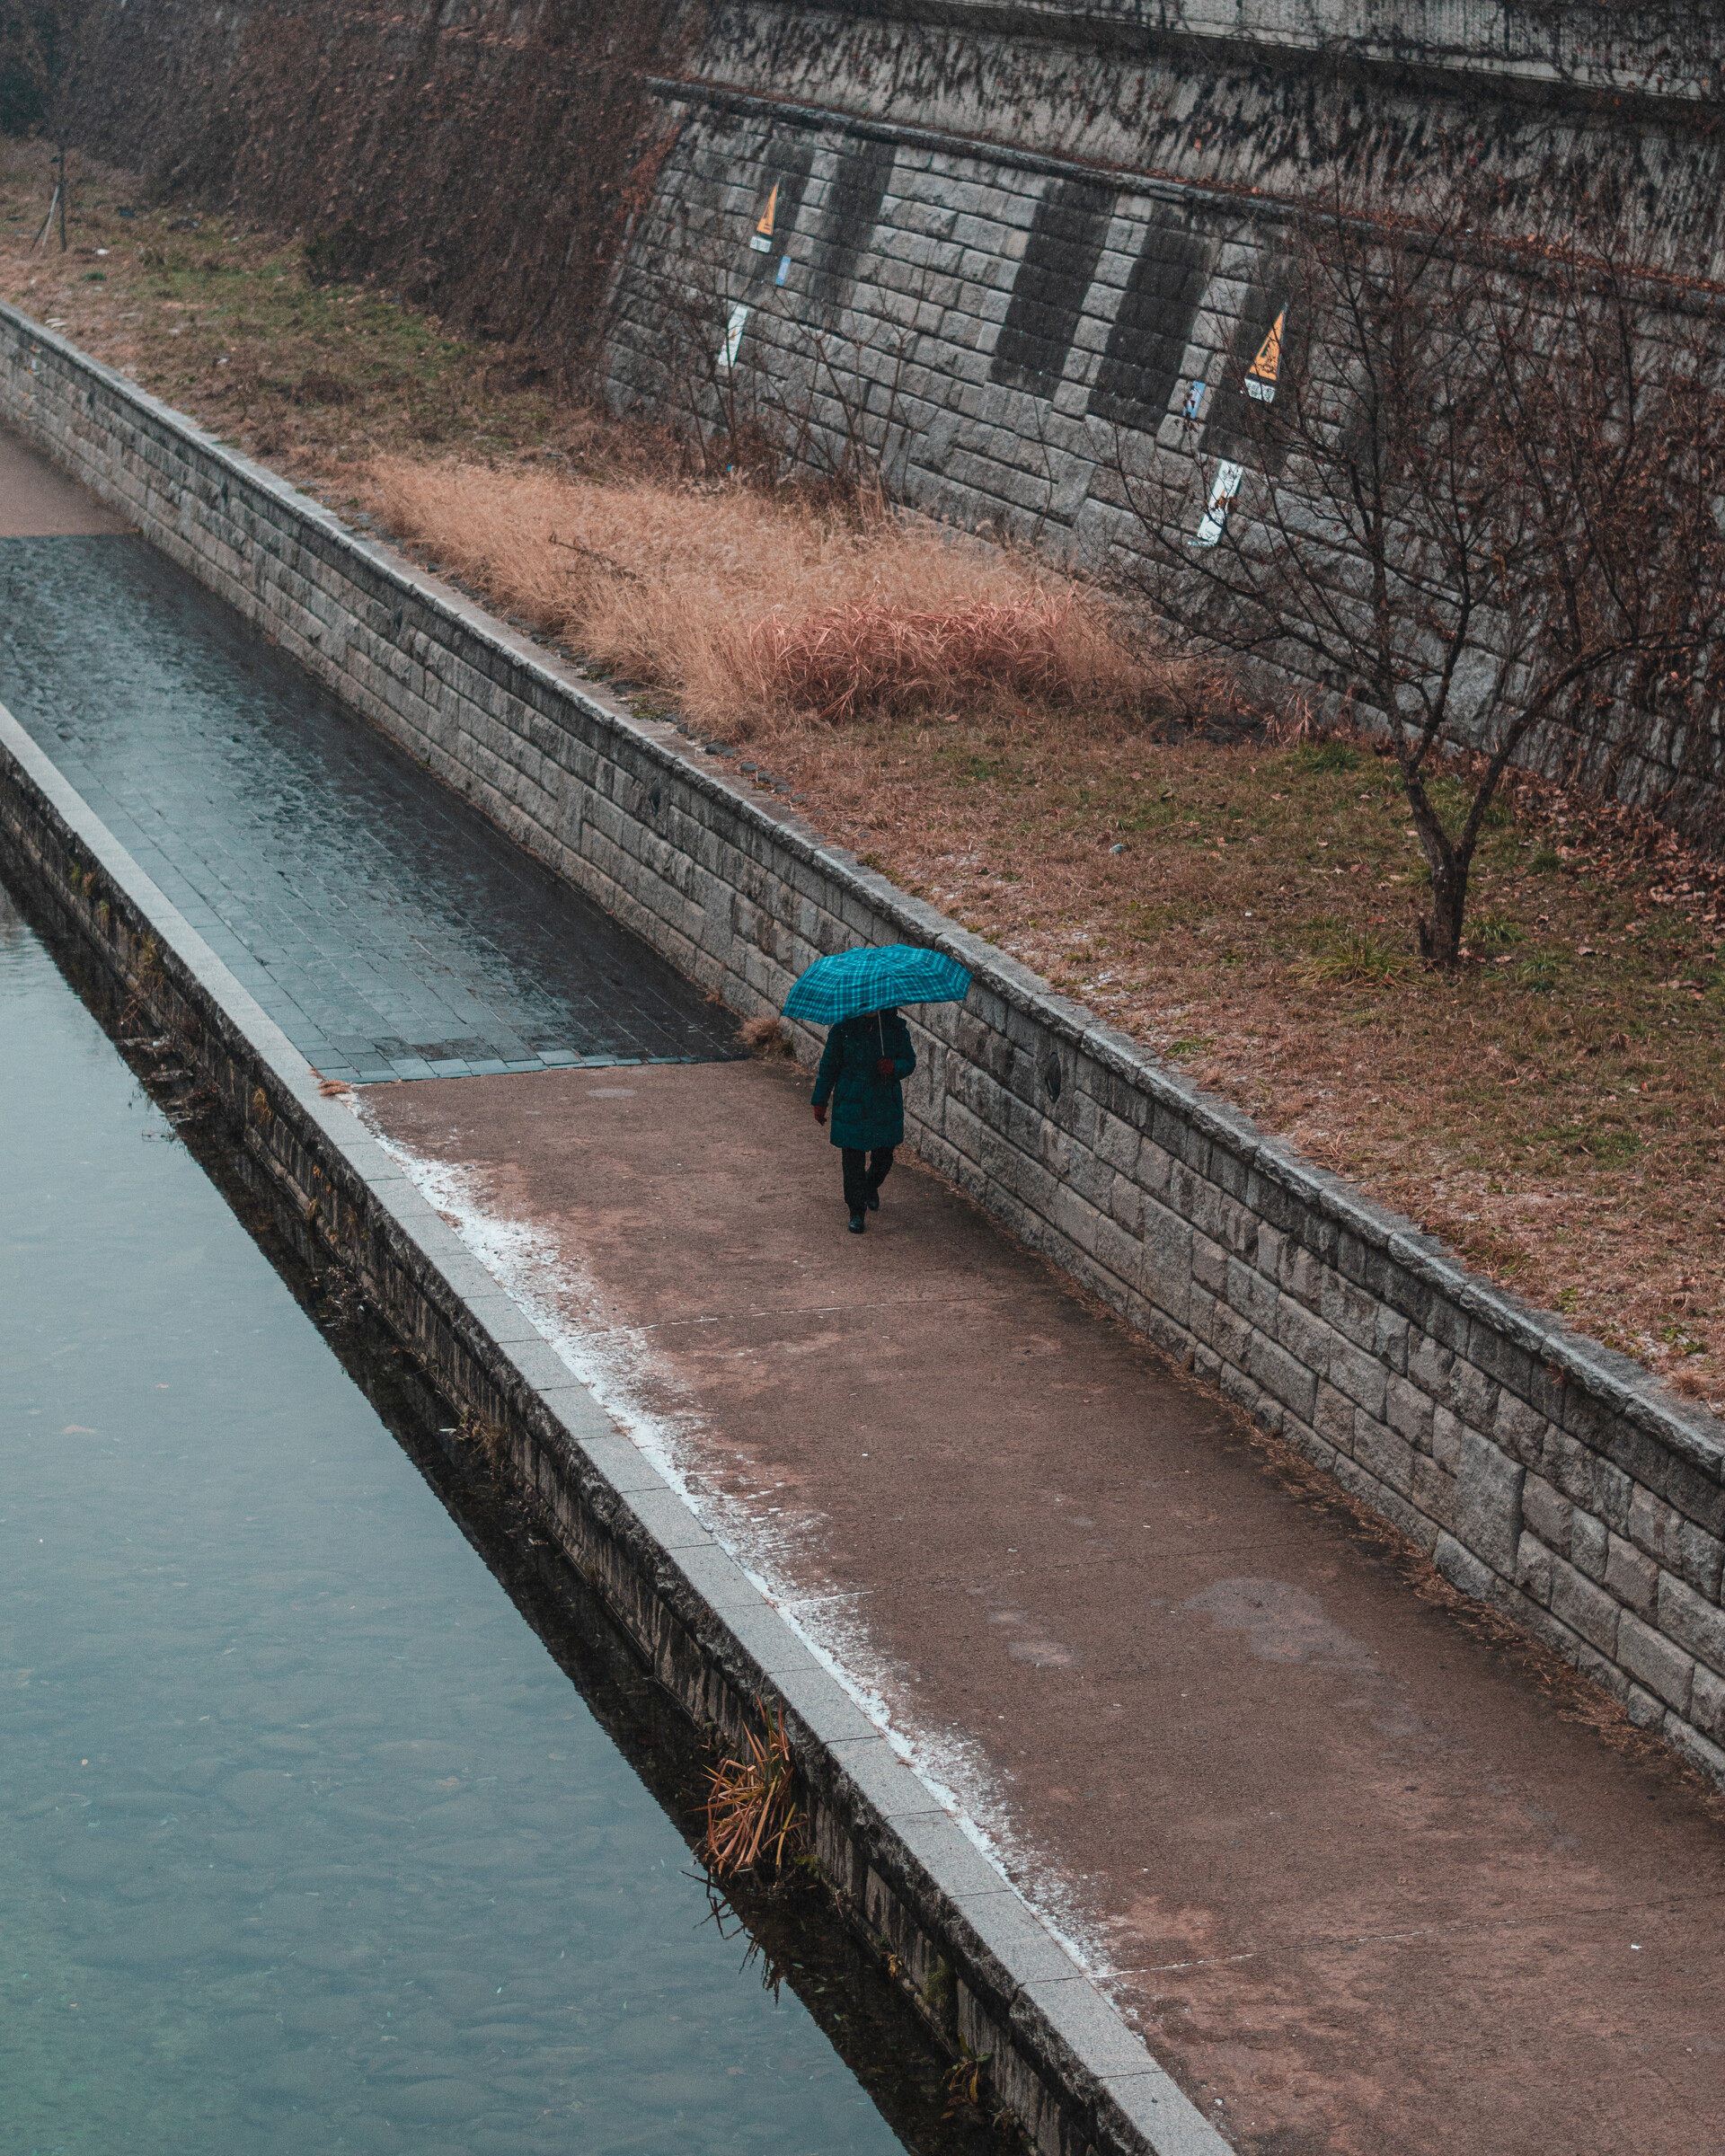 The day of the first snow at the Cheonggyecheon stream